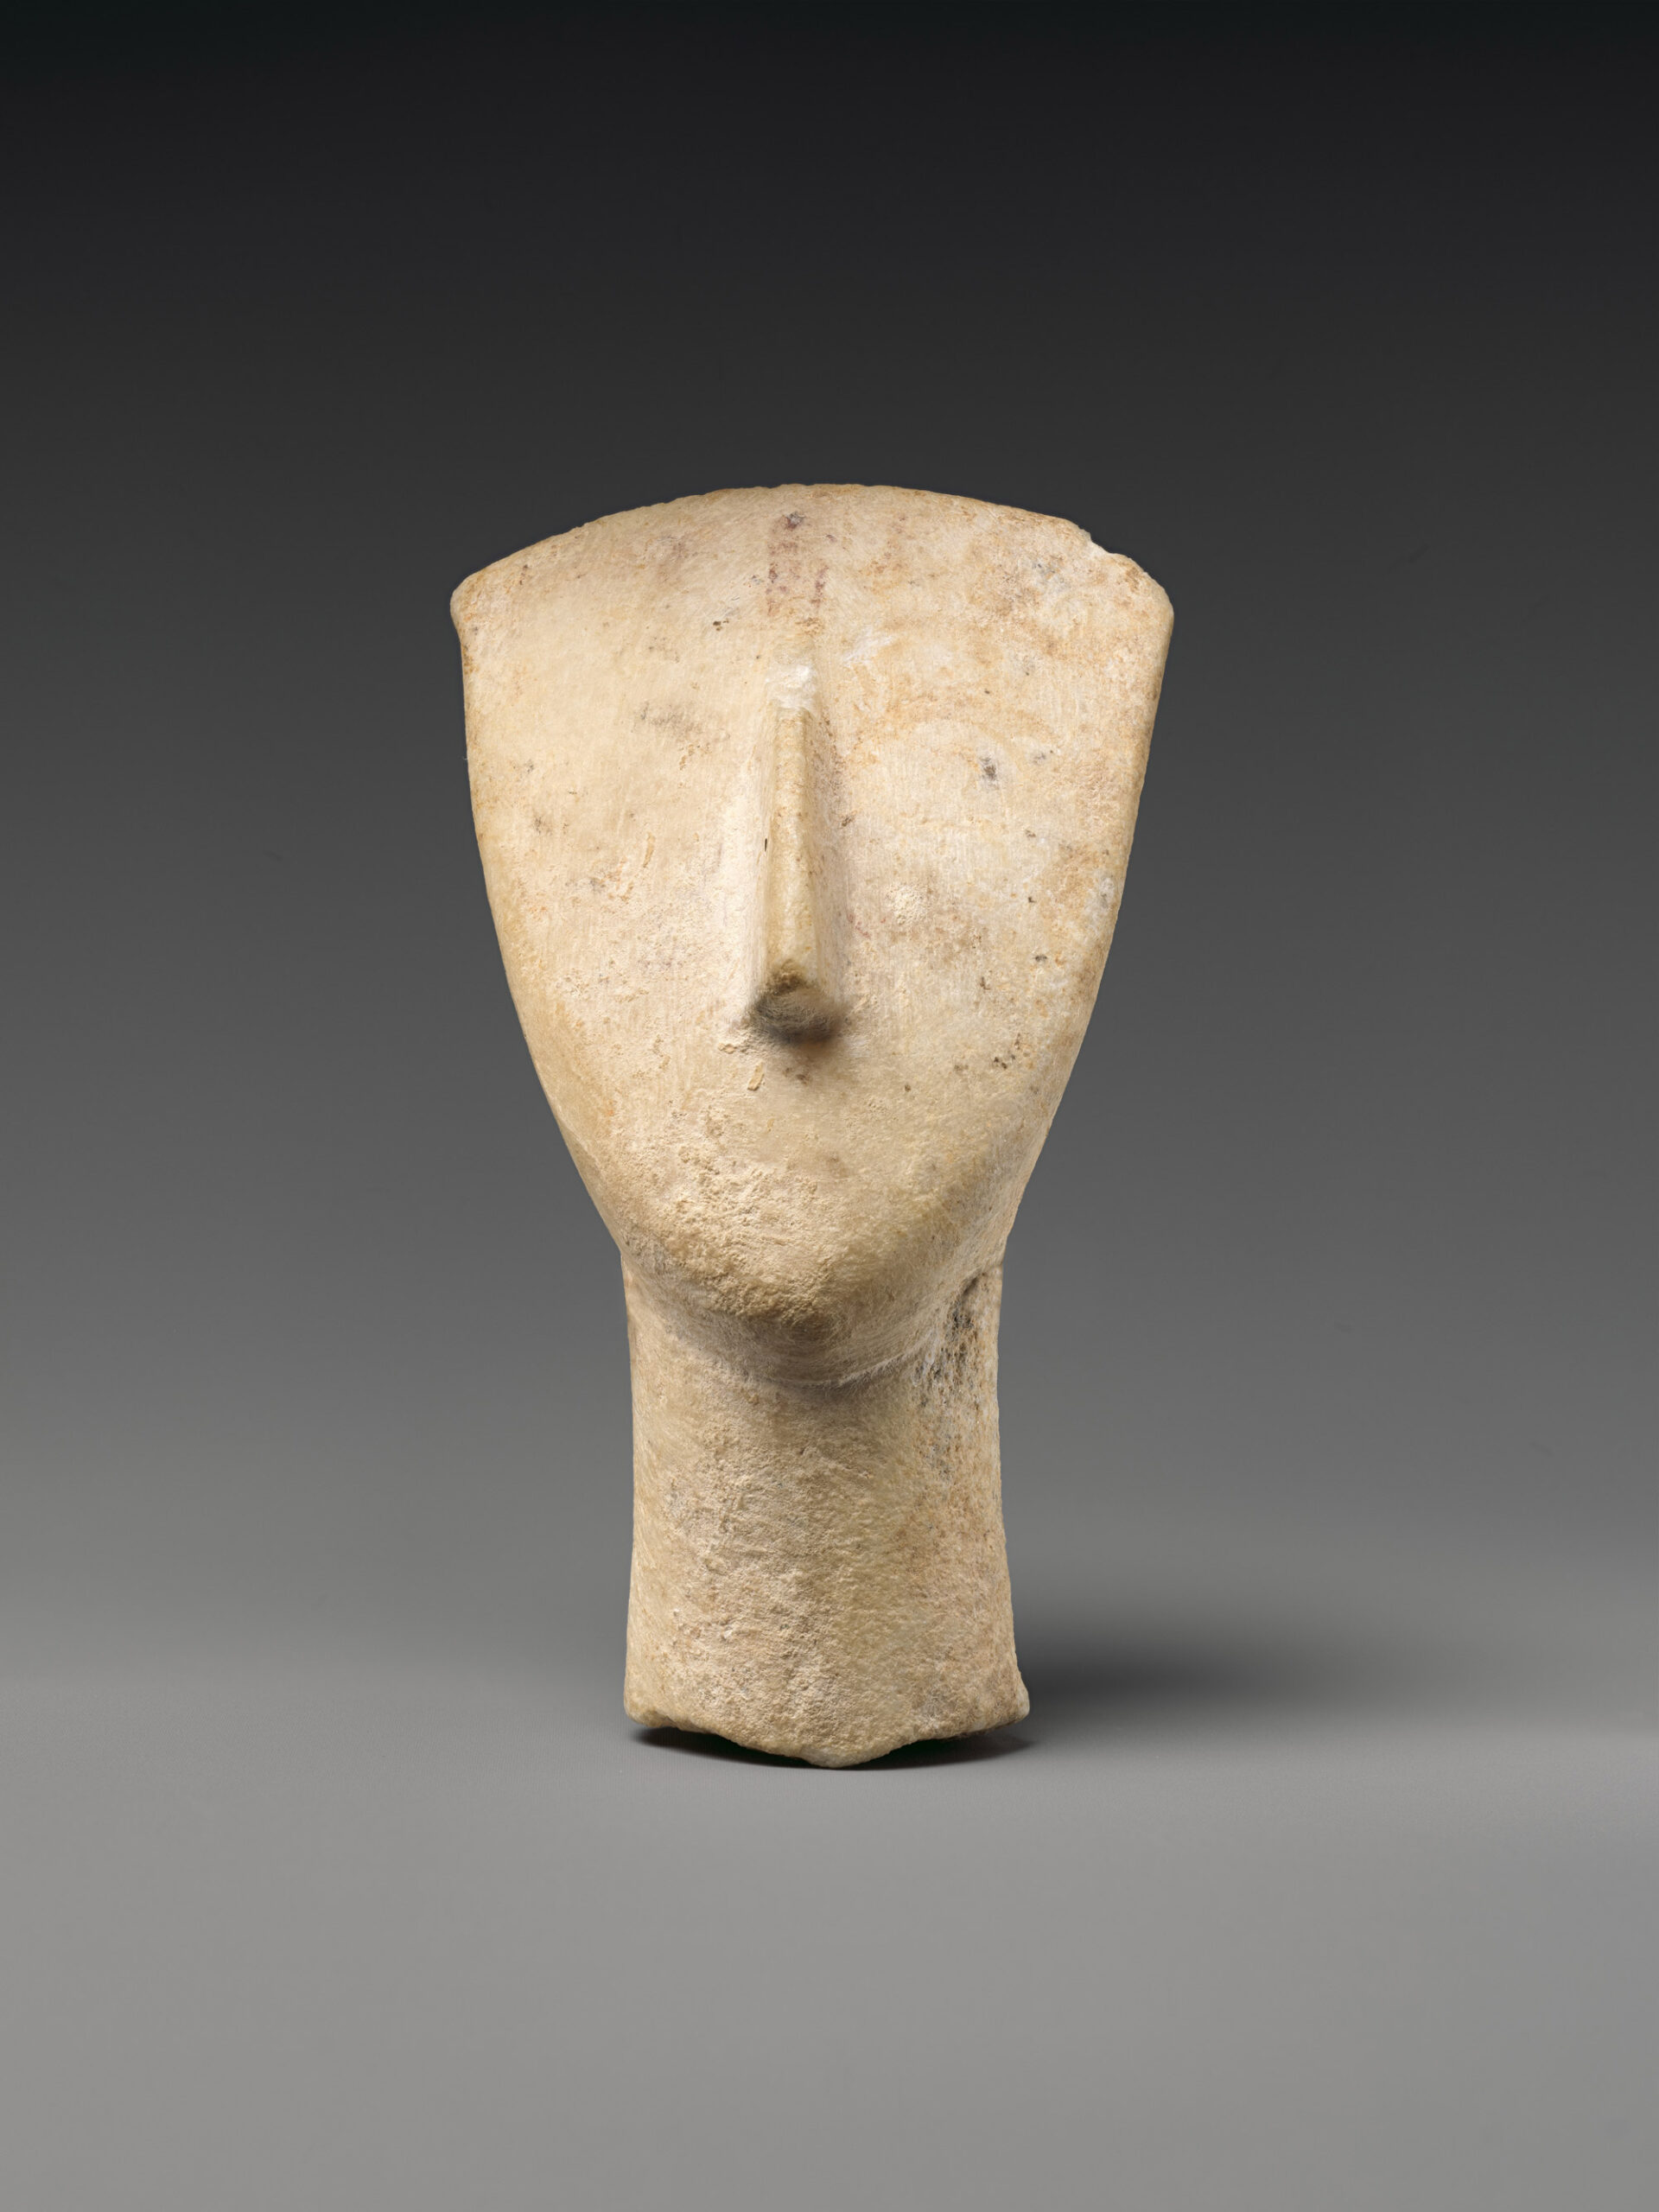 Head and neck from a marble figure, Early Cycladic II, 2700–2500 BCE, Marble, 6.6 cm x 3.8 cm, The Metropolitan Museum of Art, New York, NY, USA and Public Domain